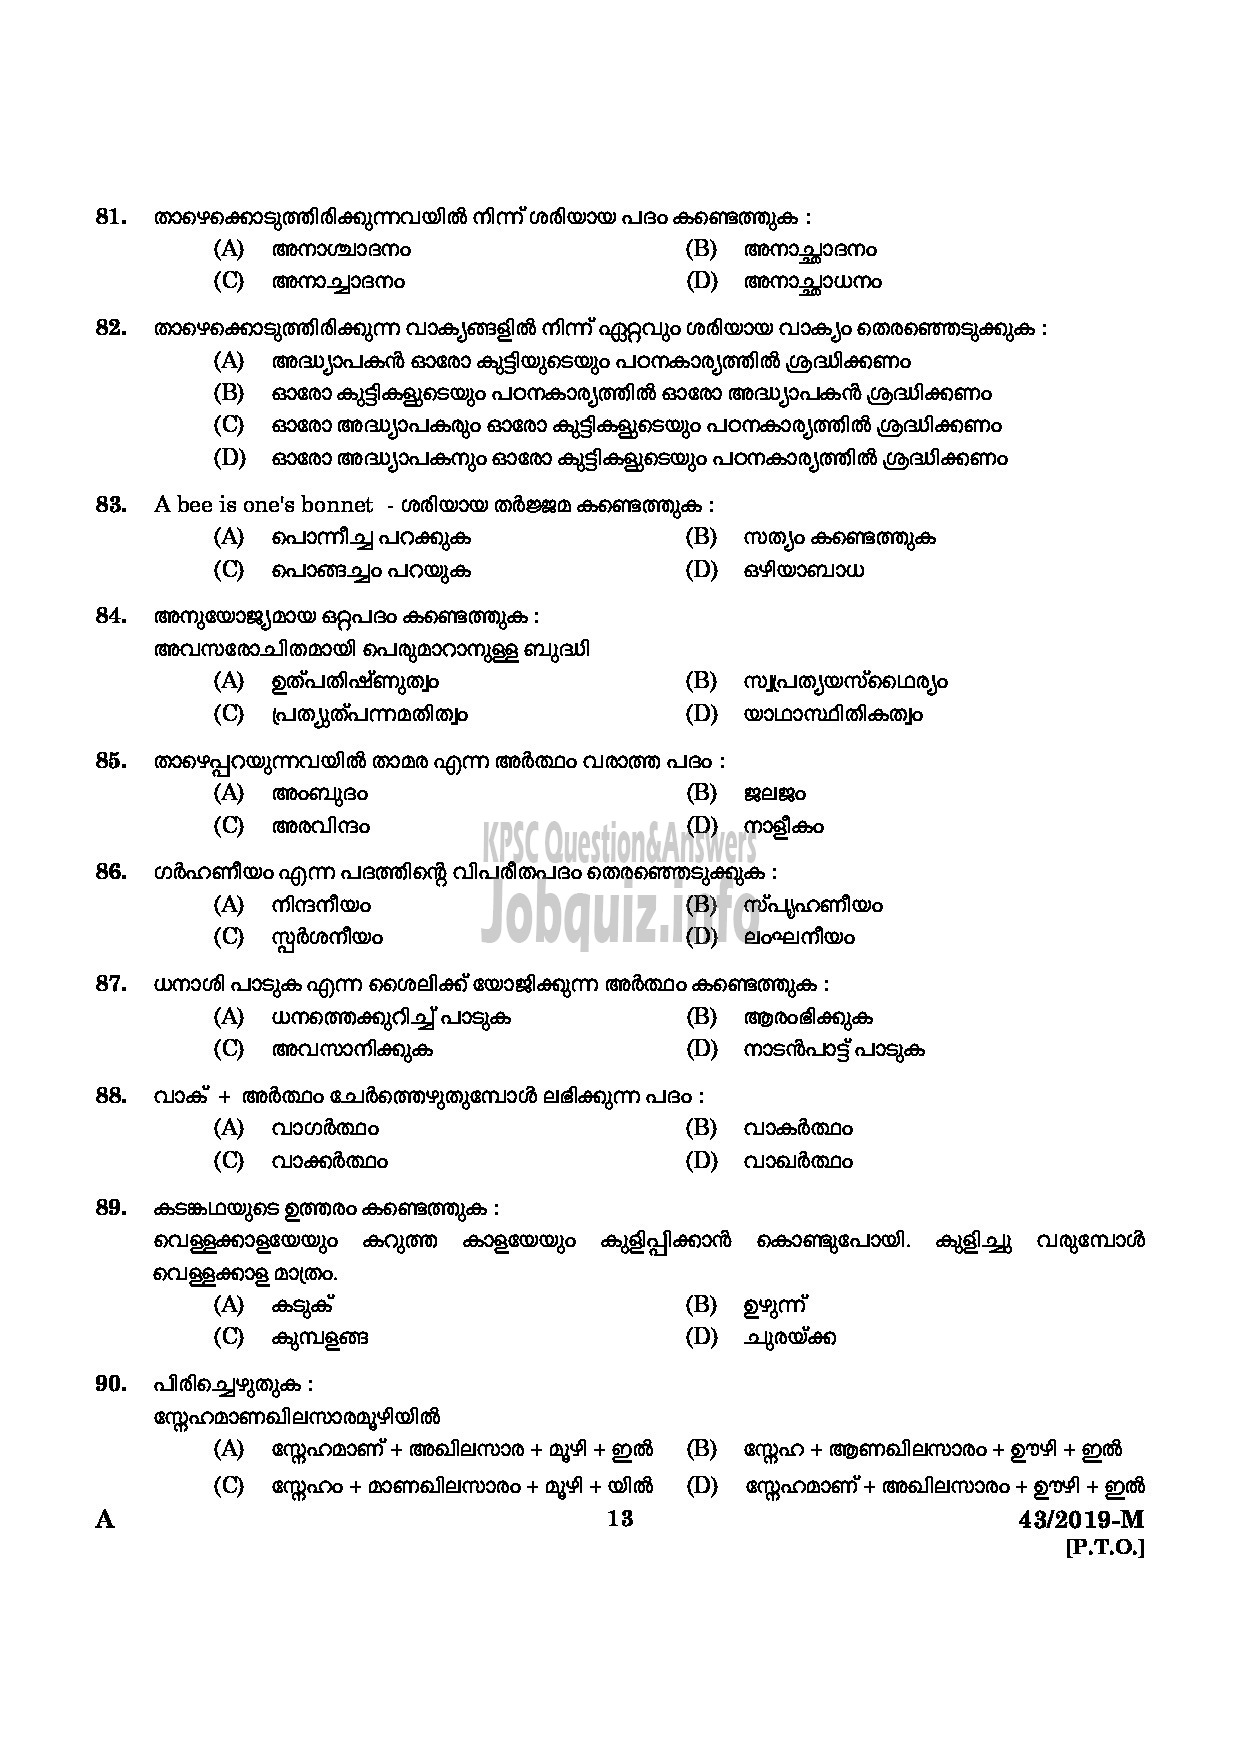 Kerala PSC Question Paper - Deputy Collector (SR For SC/ST) Land Revenue Department English / Malayalam -11